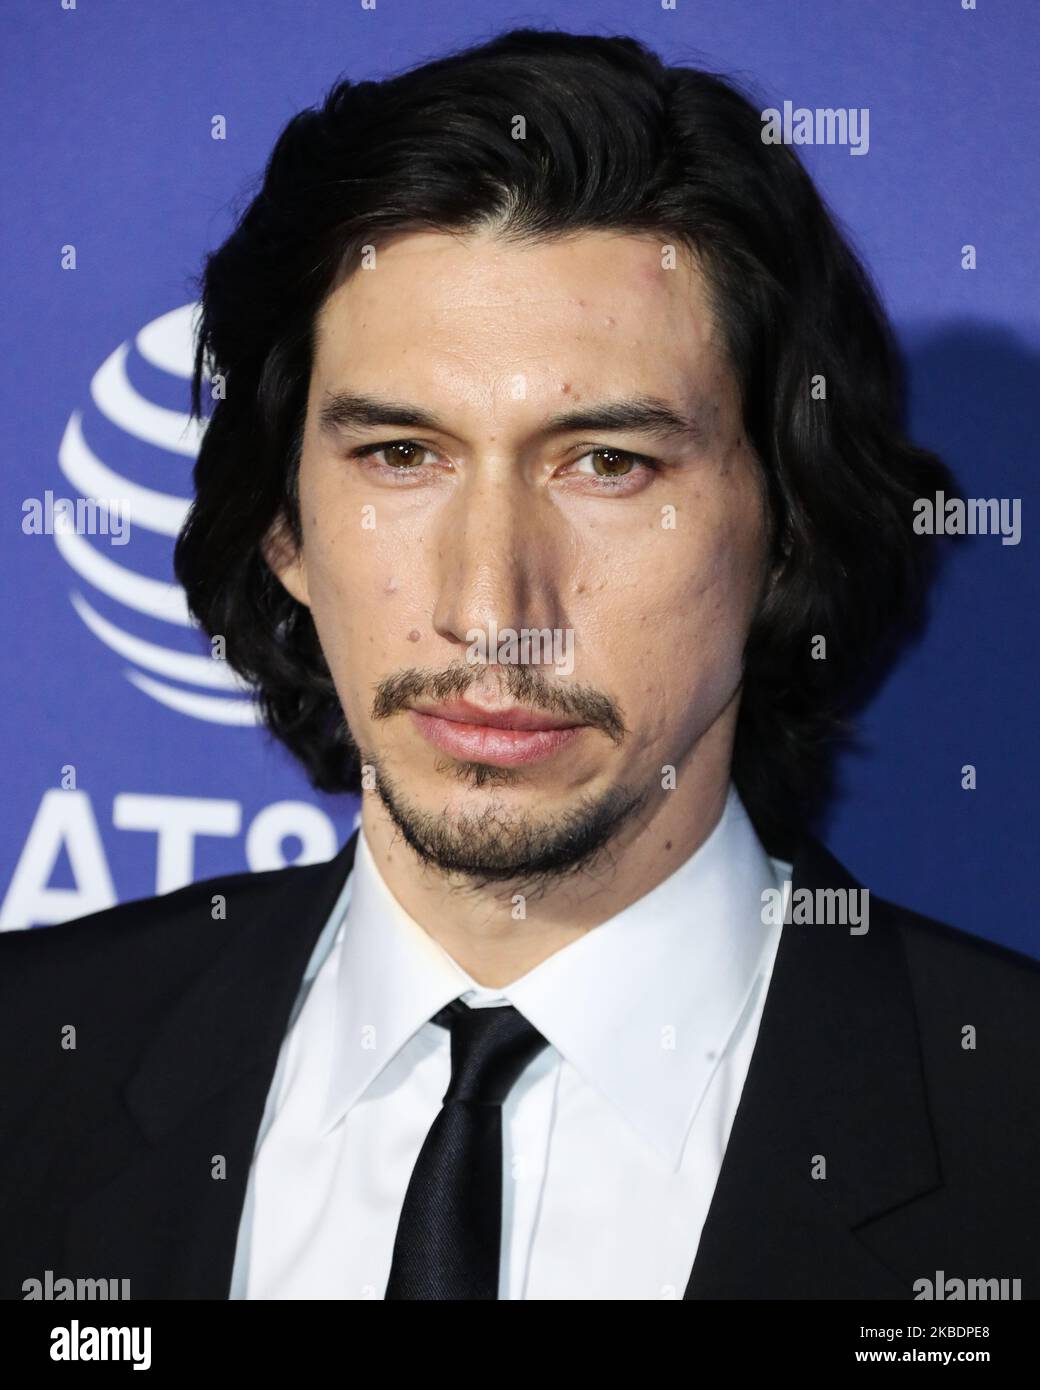 PALM SPRINGS, CALIFORNIA, USA - JANUARY 02: Adam Driver arrives at the 31st Annual Palm Springs International Film Festival Awards Gala held at the Palm Springs Convention Center on January 2, 2020 in Palm Springs, California, United States. (Photo by Xavier Collin/Image Press Agency/NurPhoto) Stock Photo